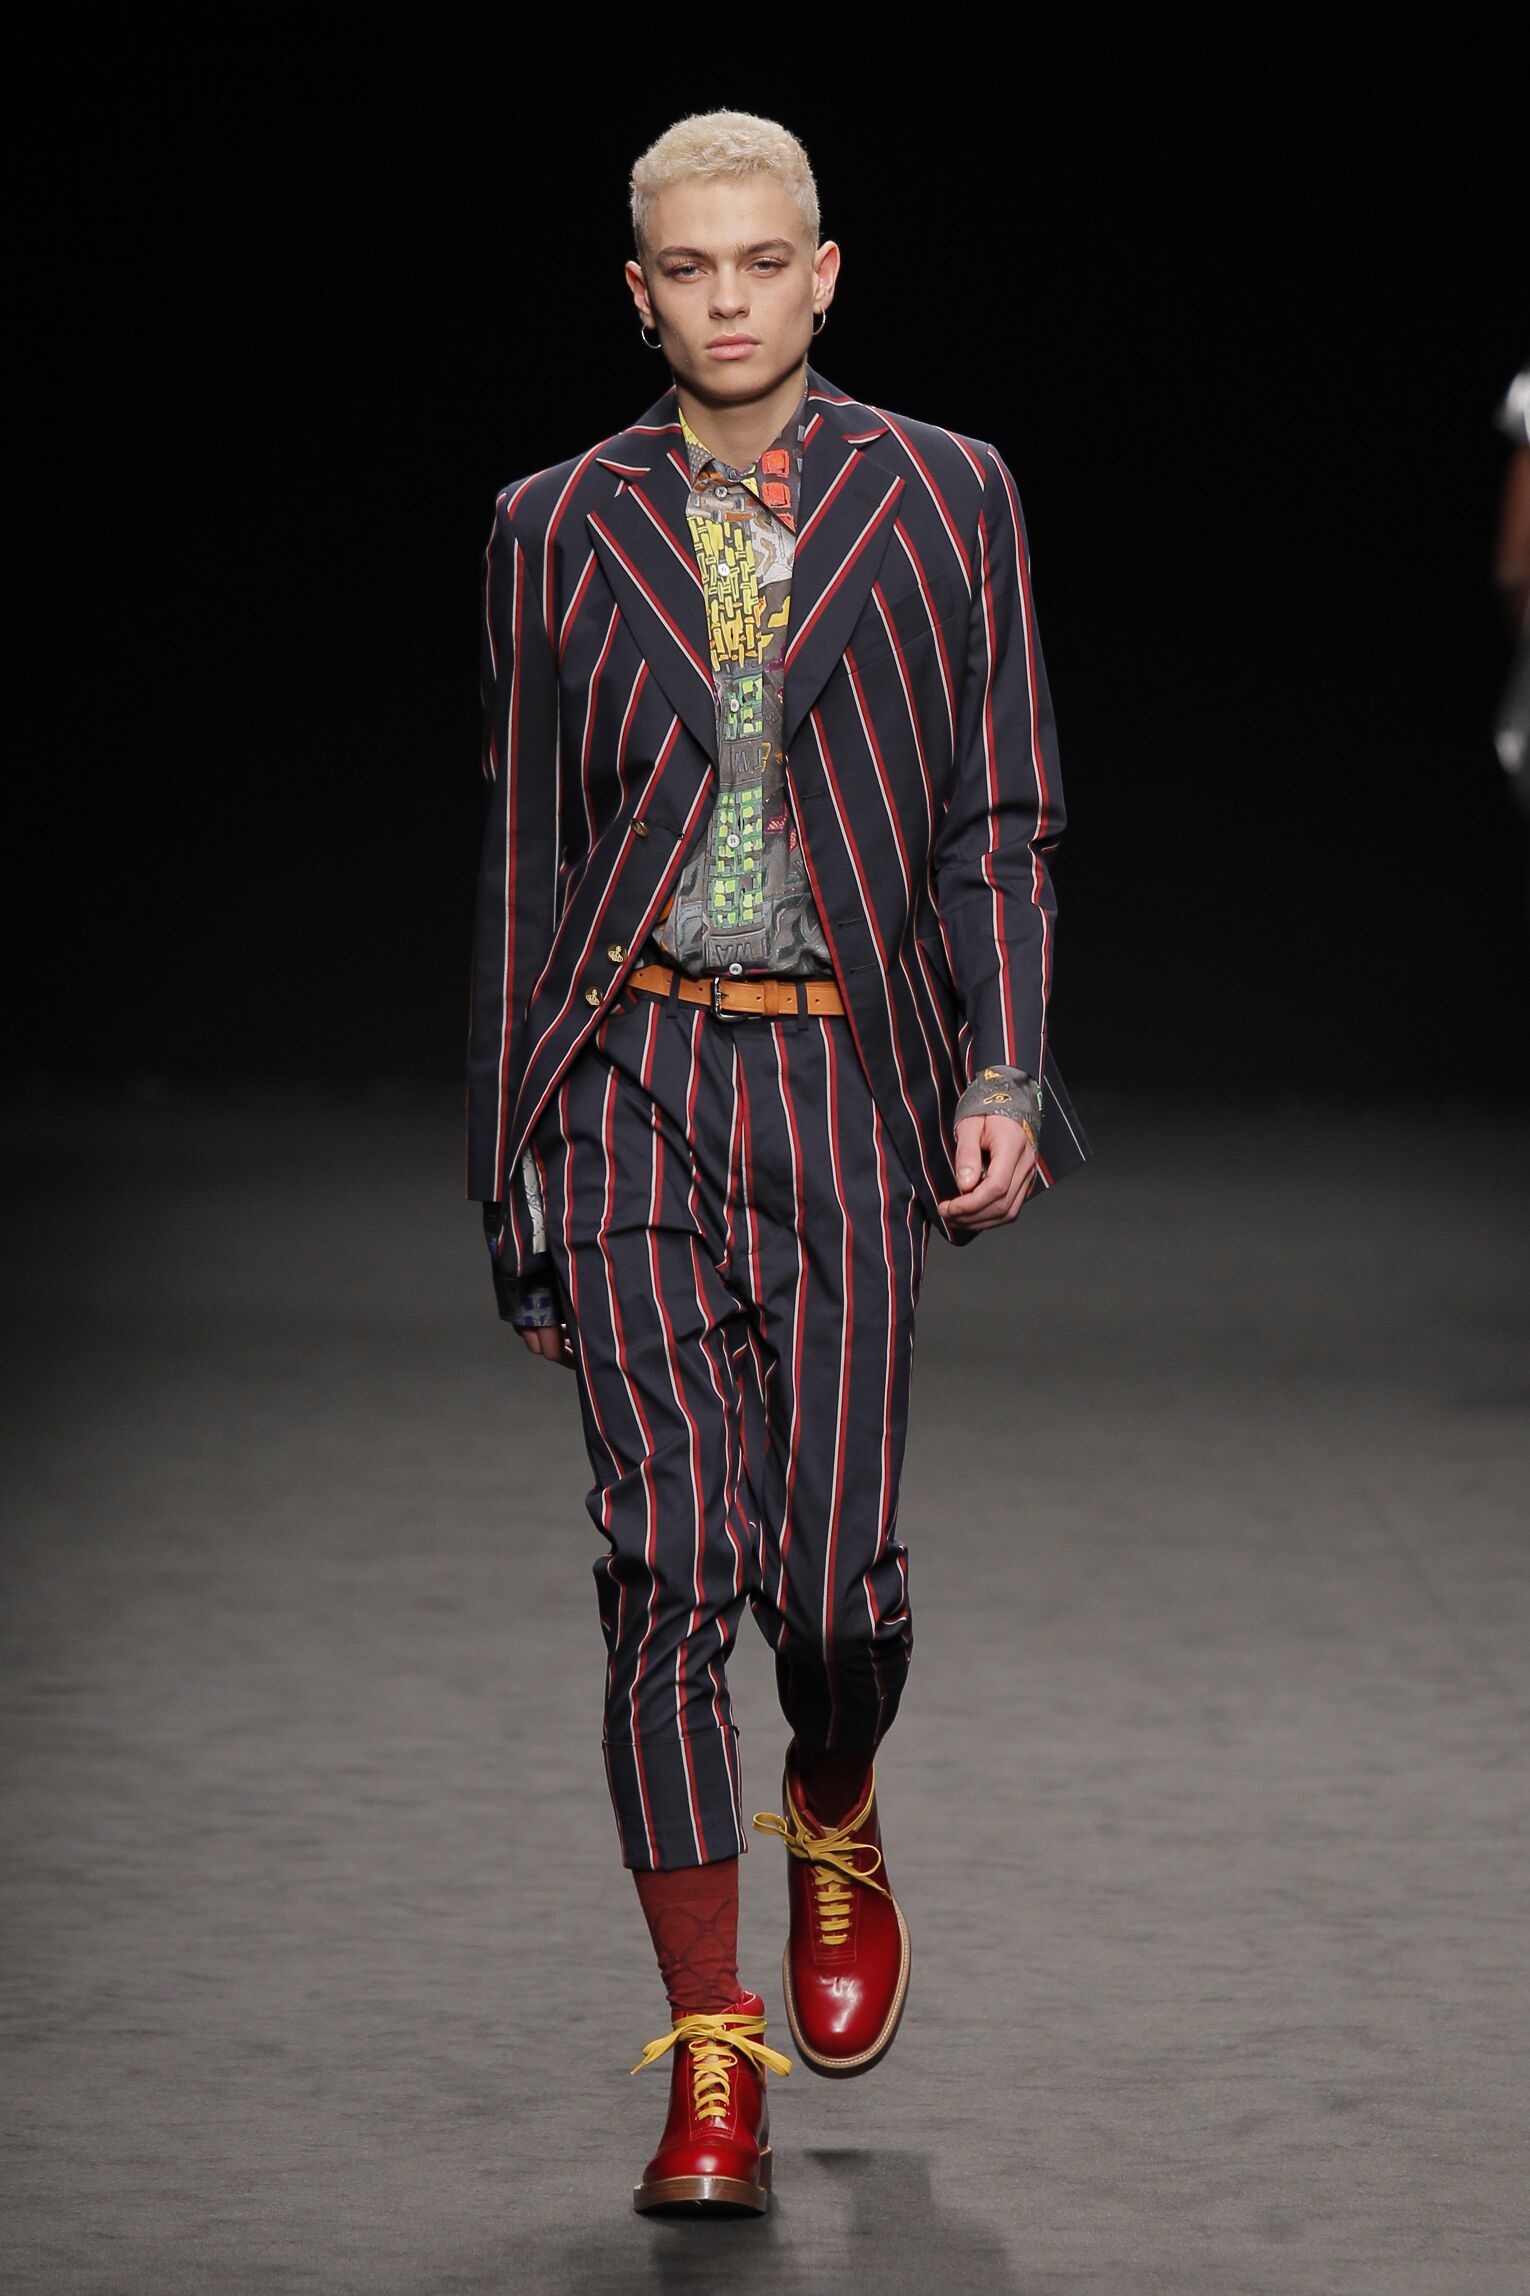 VIVIENNE WESTWOOD FALL WINTER 2016-17 MEN’S COLLECTION | The Skinny Beep